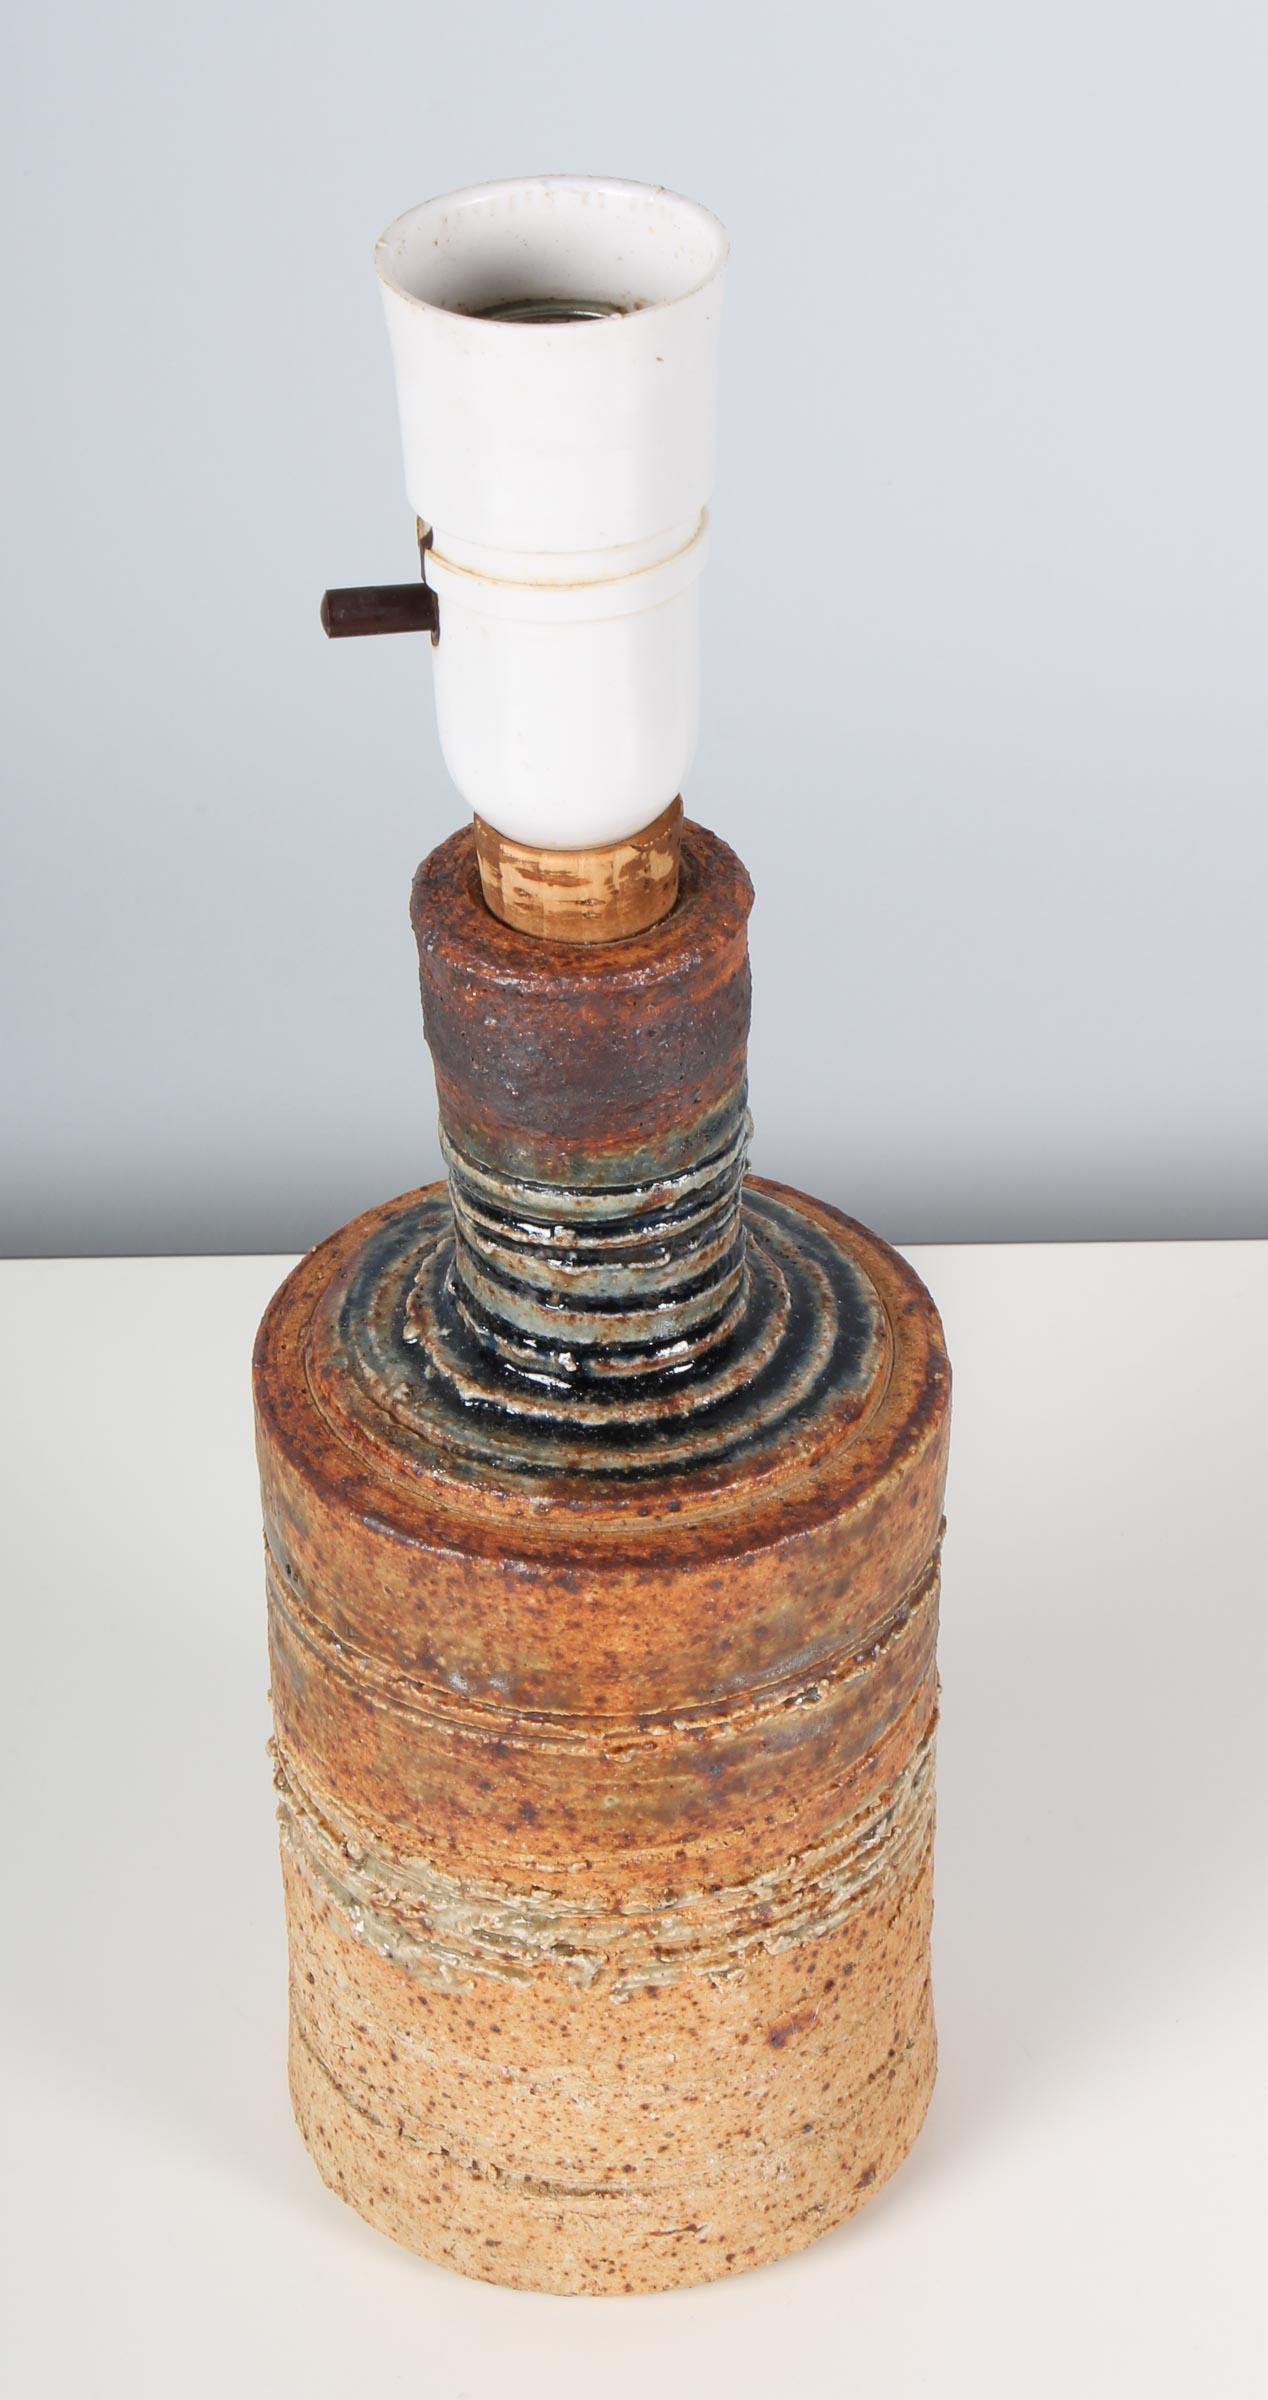 1960s wheel thrown stoneware tablelamp by Danish ceramist Tue Poulsen. Clear glazed speckled neutral stoneware clay body with incised horizontal design work over iron oxide colorant. Stamped underside “Tue Denmark”.

 